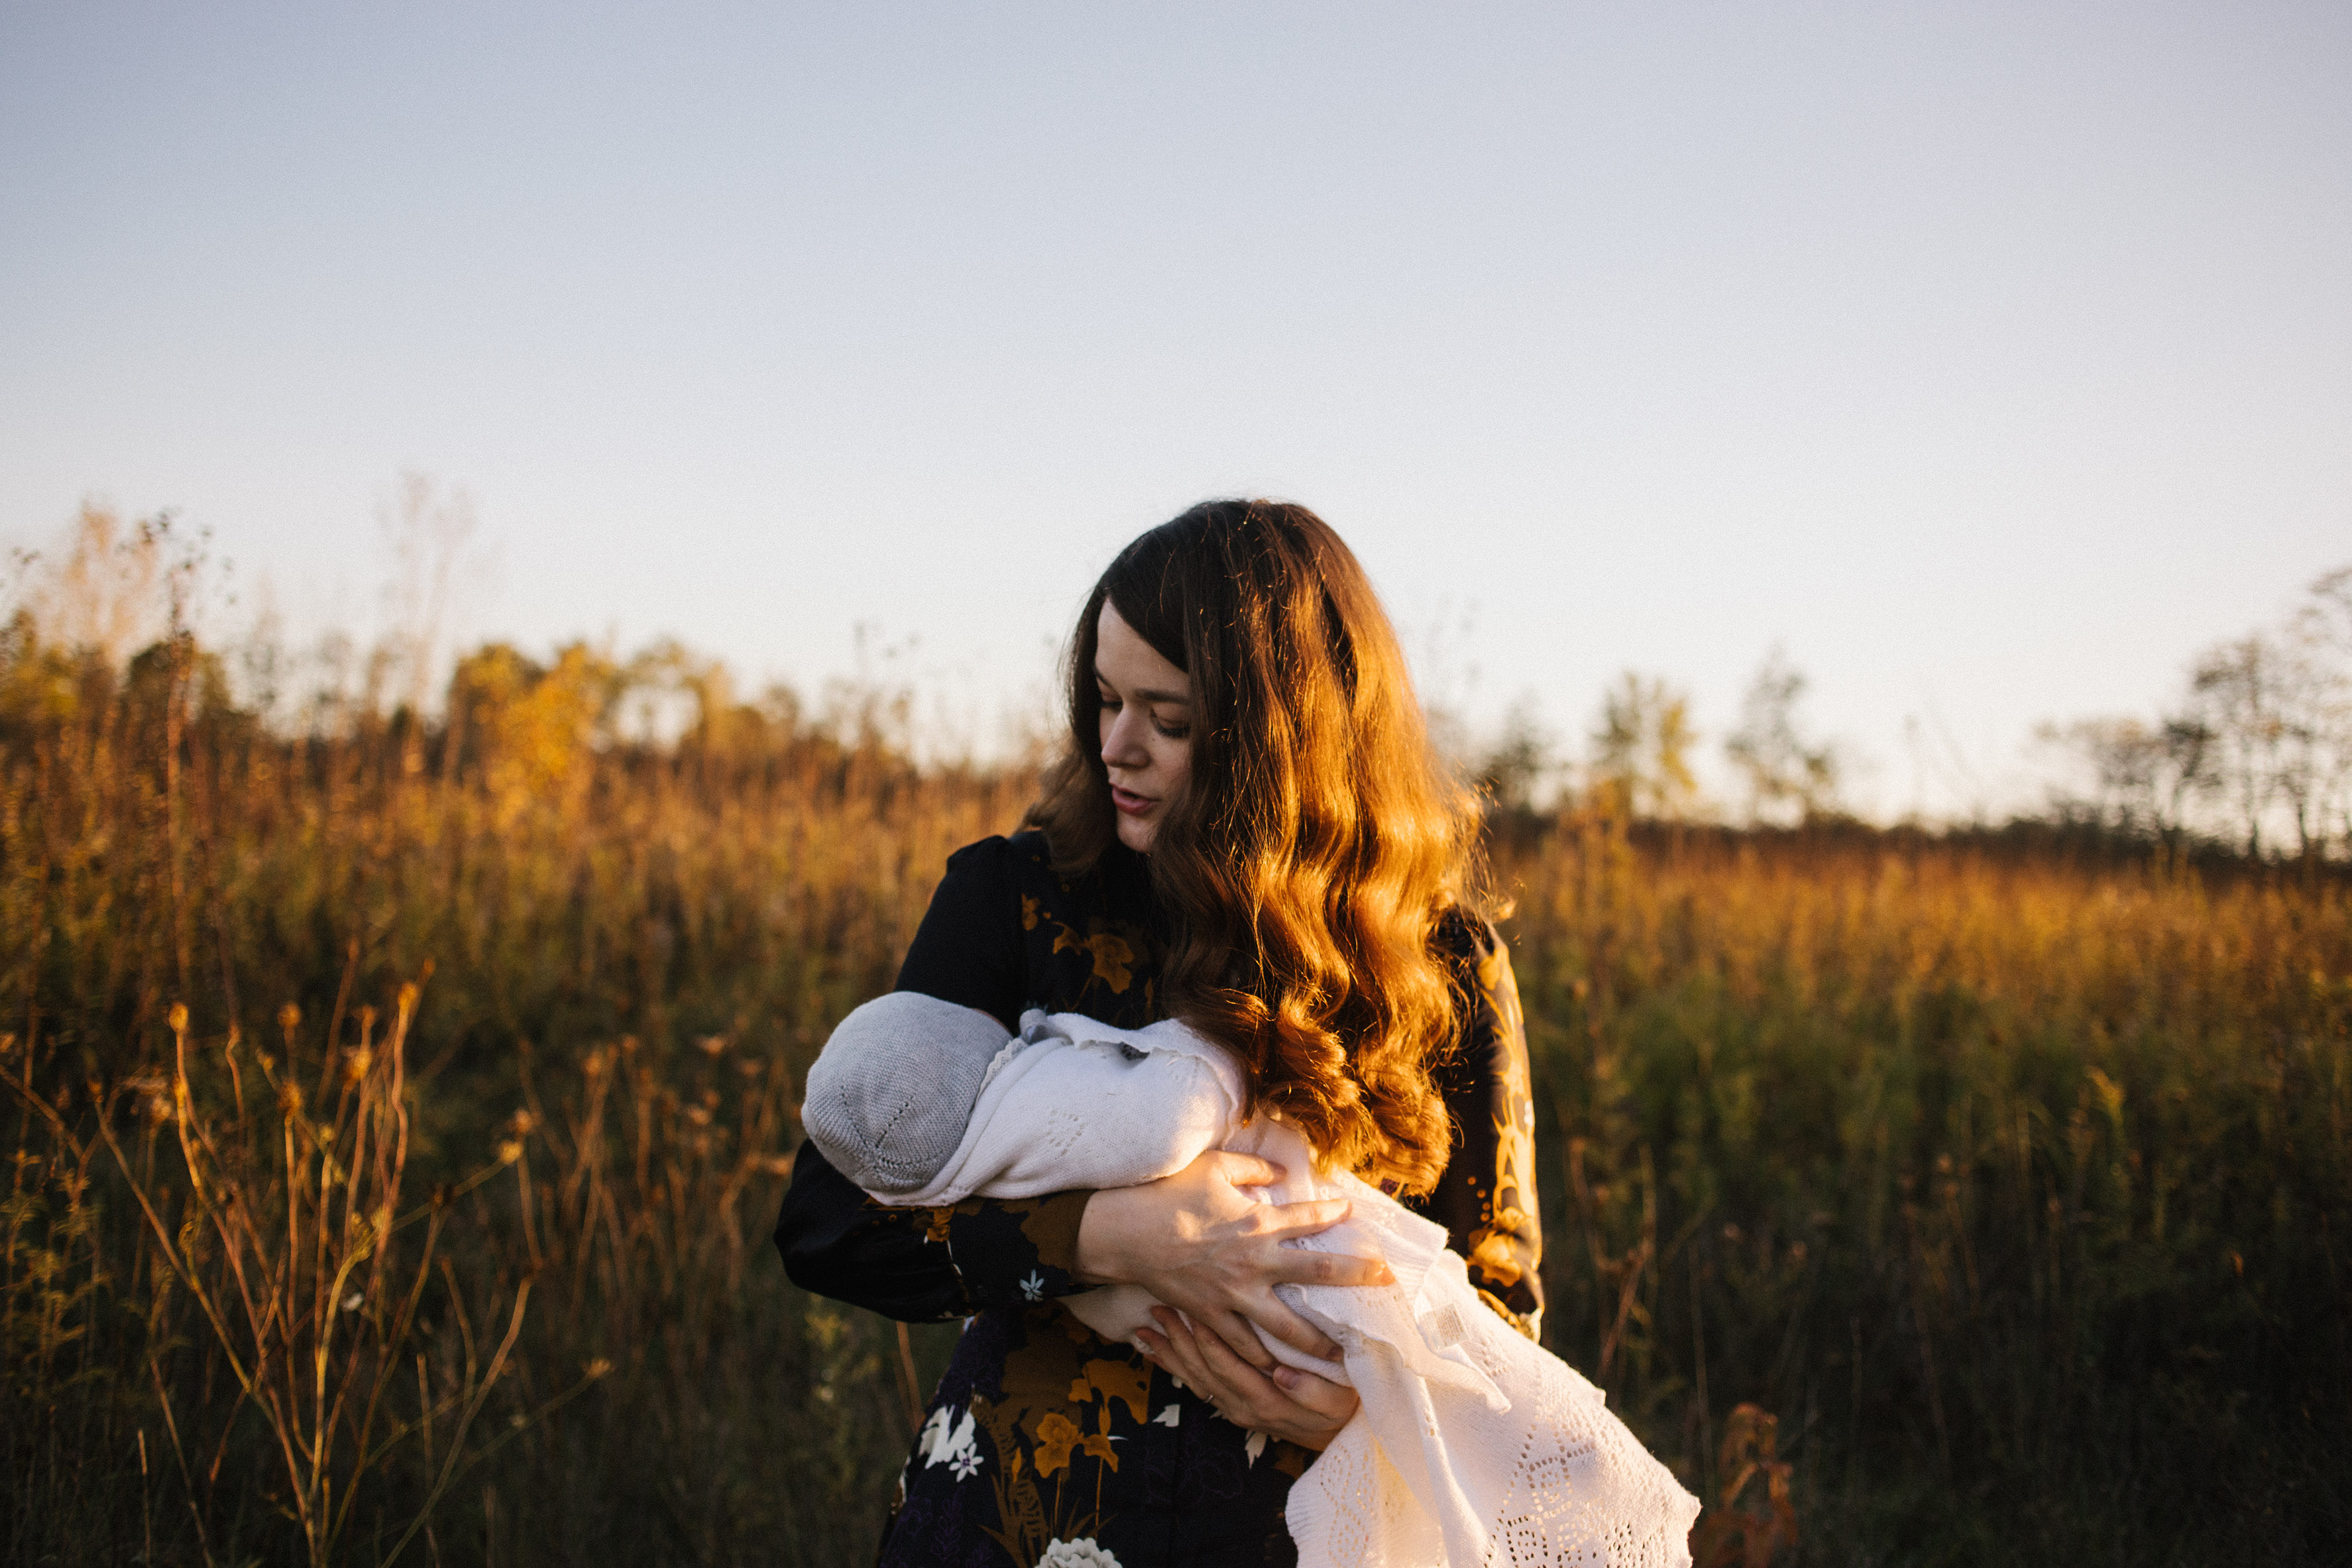 5 Tips on how to shoot during sunset | A golden hour session with a woman and her newborn baby.